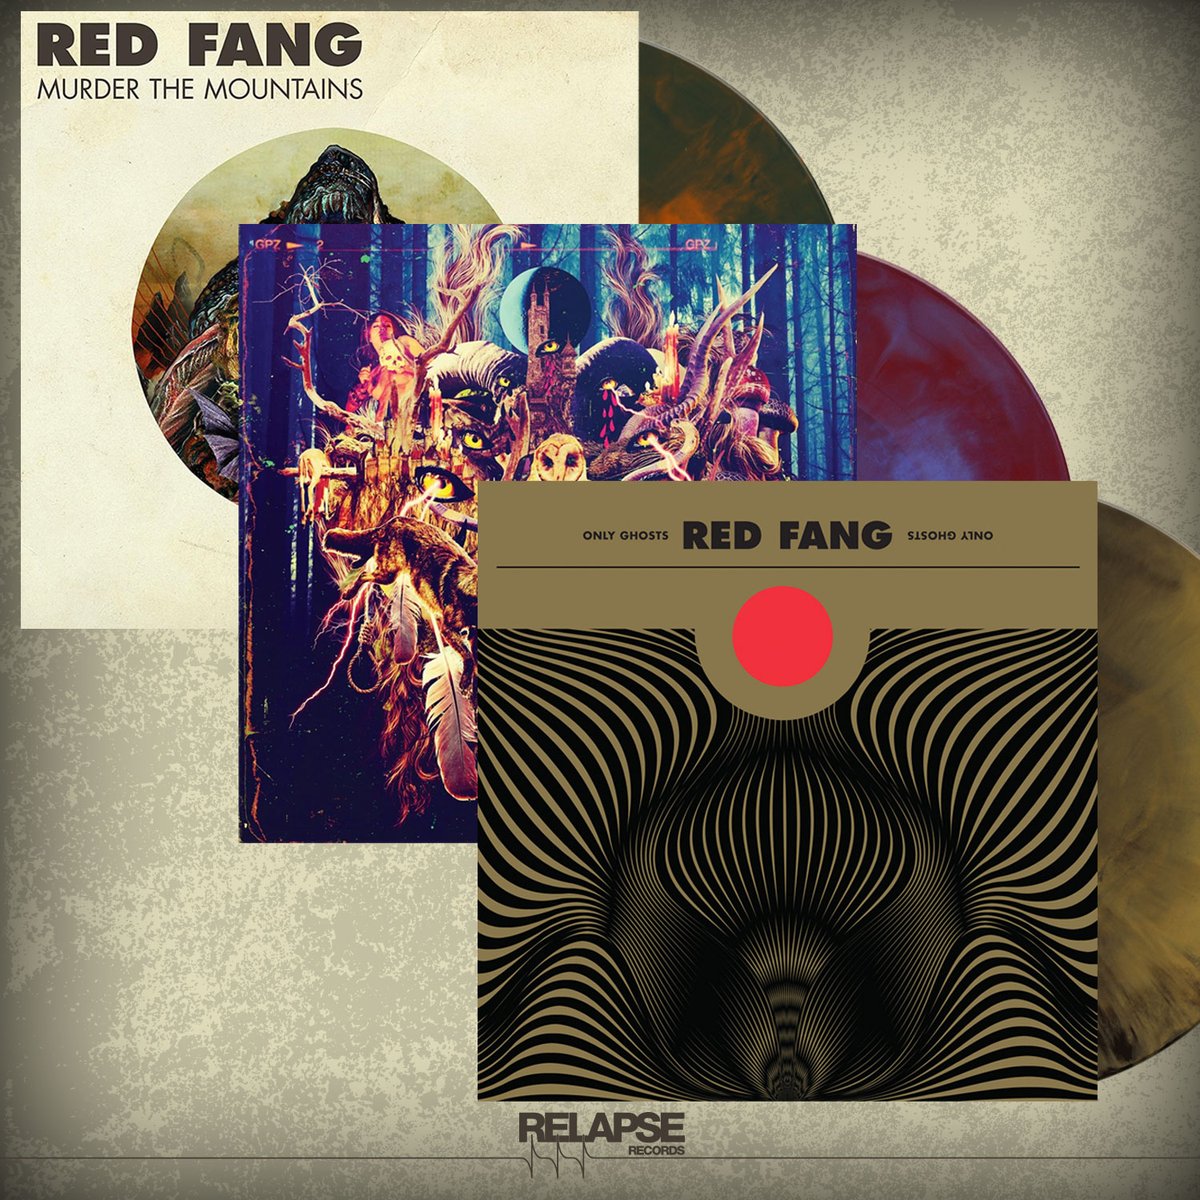 Discounted Red Fang LPs and CDs available now for @RelapseRecords' Black Friday Sale! relapse.com/collections/re…